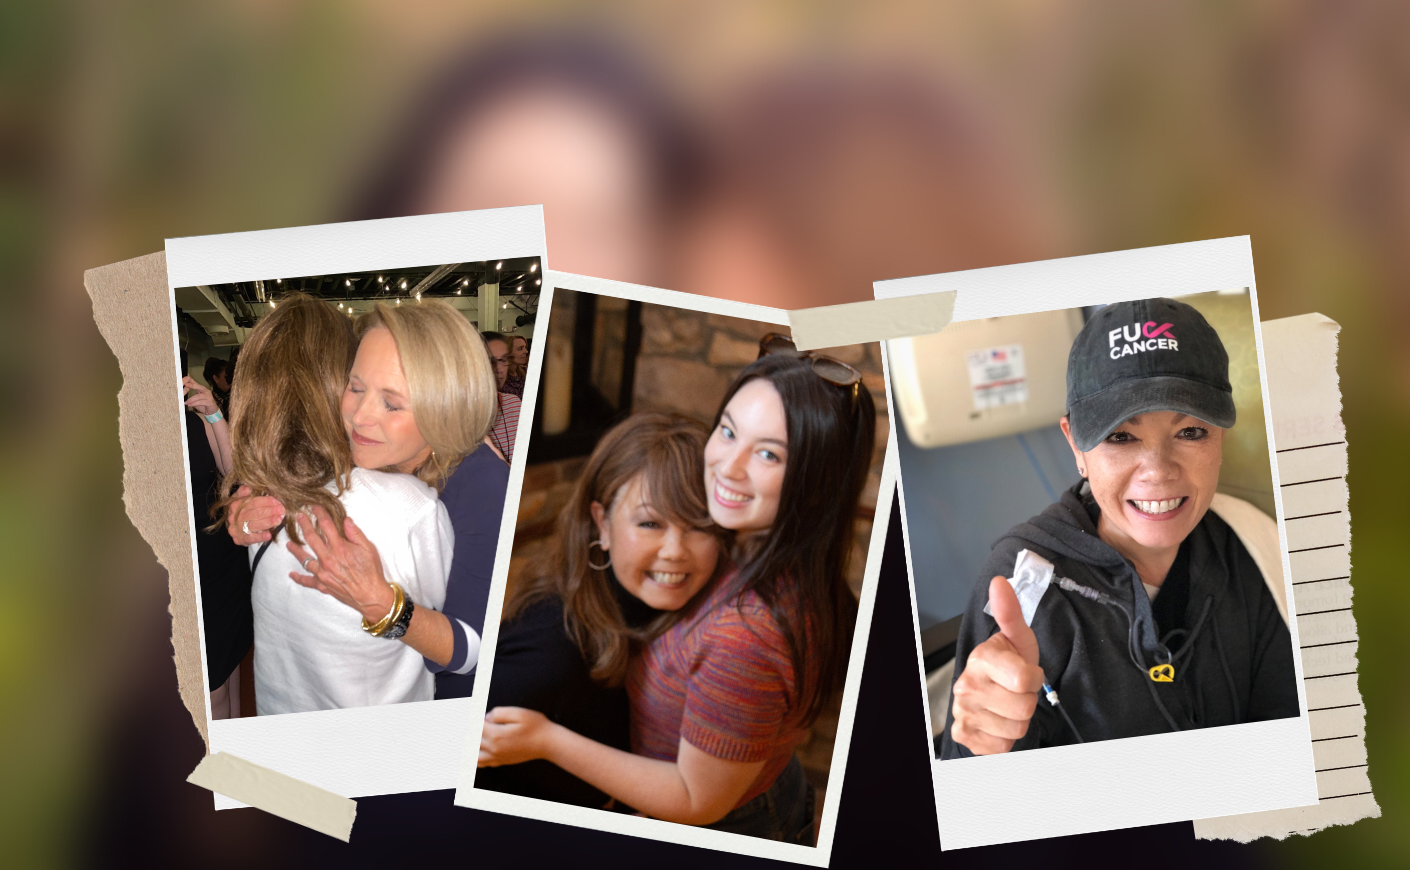 3 photos of donna otis and her daughter and katie couric